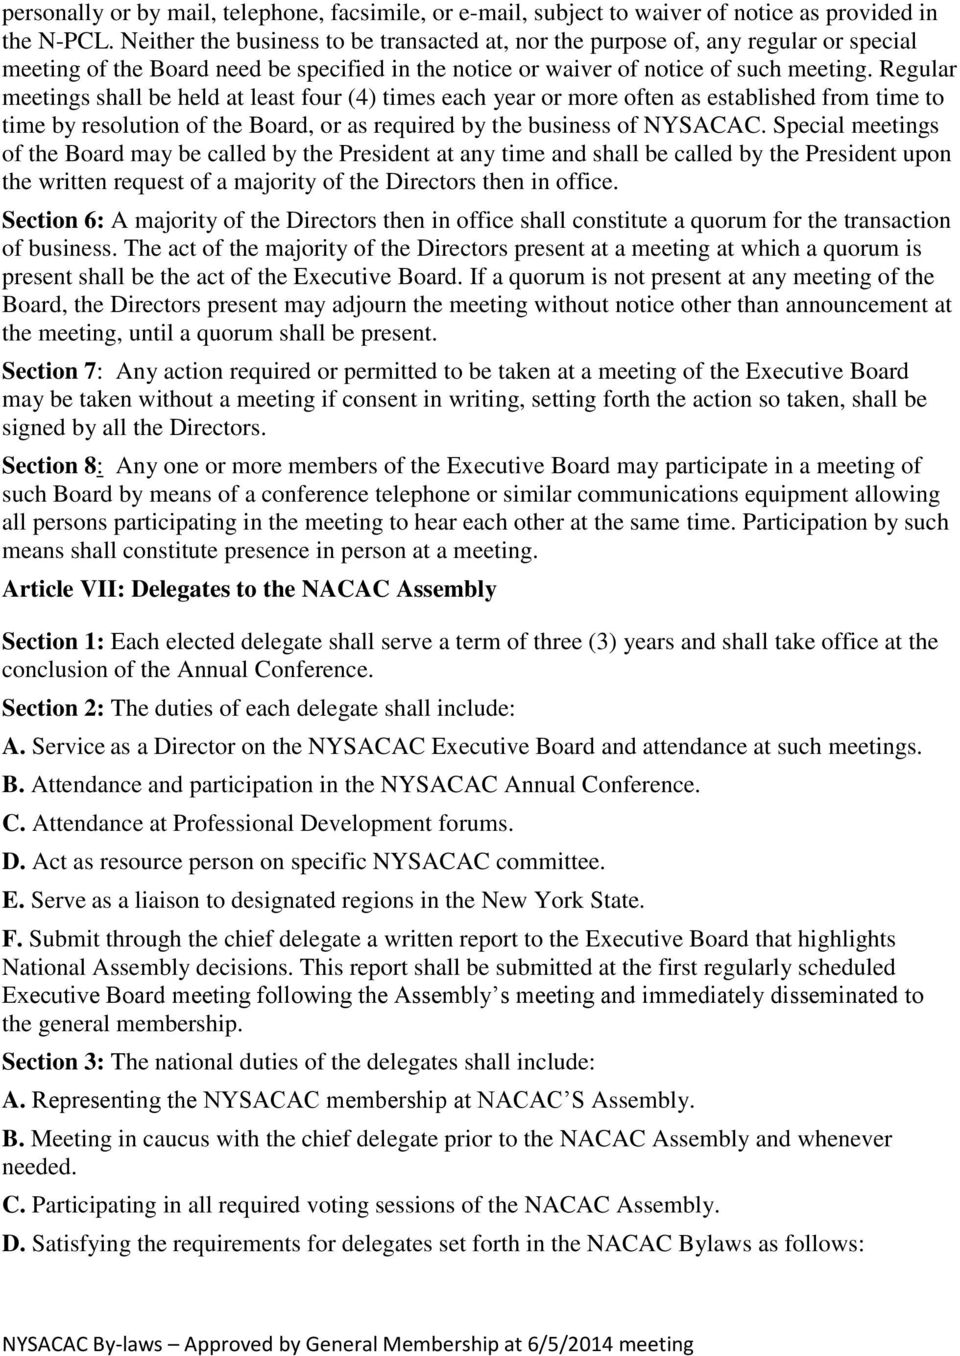 Regular meetings shall be held at least four (4) times each year or more often as established from time to time by resolution of the Board, or as required by the business of NYSACAC.